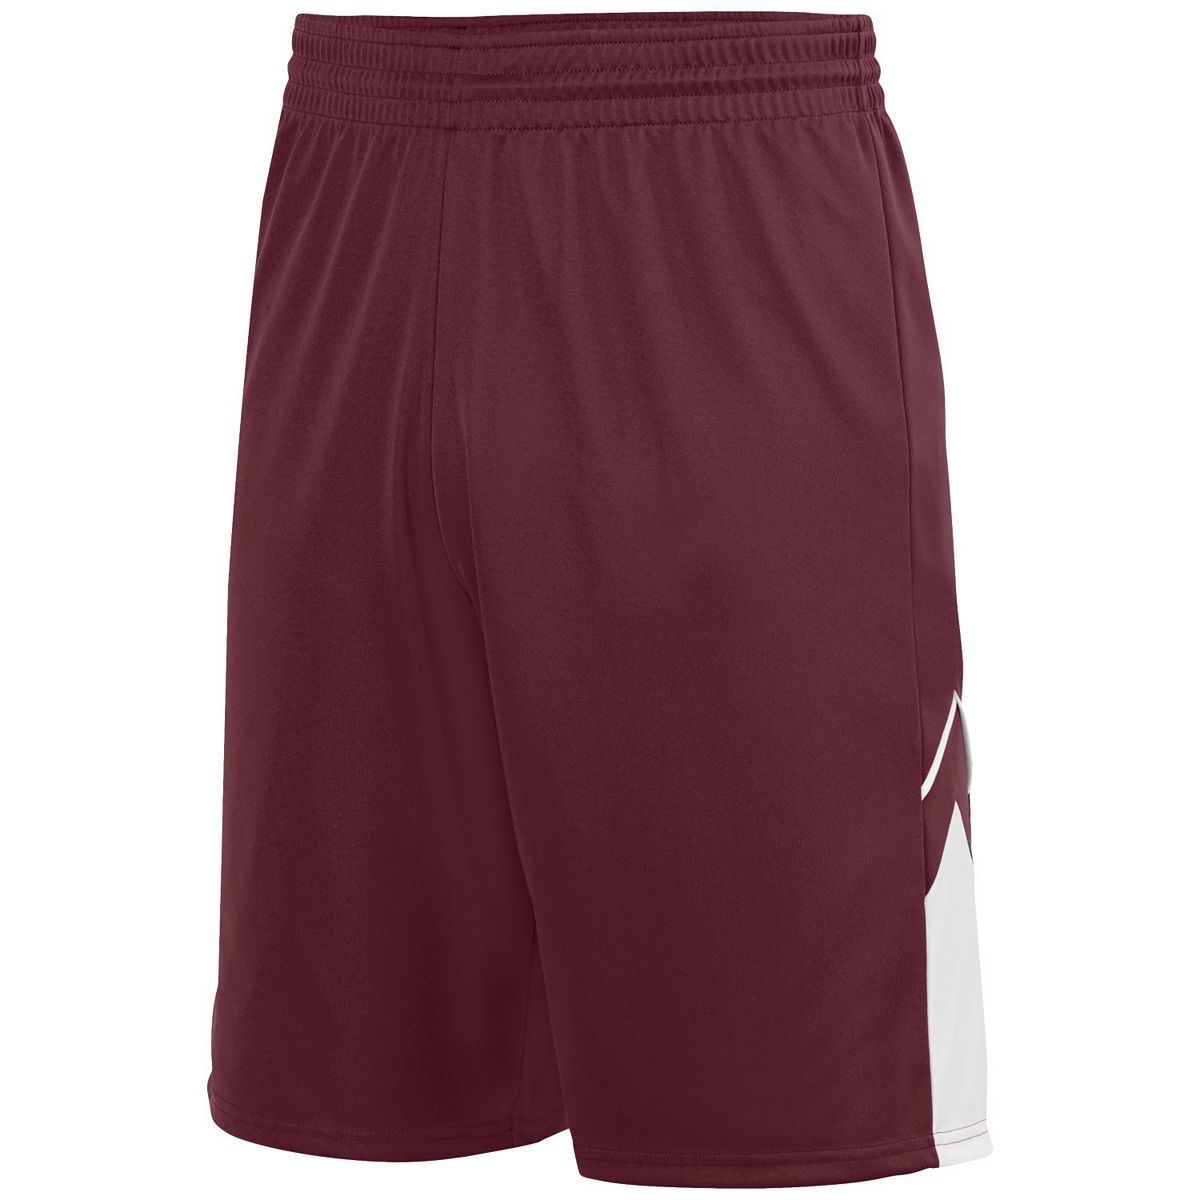 Augusta Sportswear Alley-Oop Reversible Shorts in Maroon/White  -Part of the Adult, Adult-Shorts, Augusta-Products, Basketball, All-Sports, All-Sports-1 product lines at KanaleyCreations.com